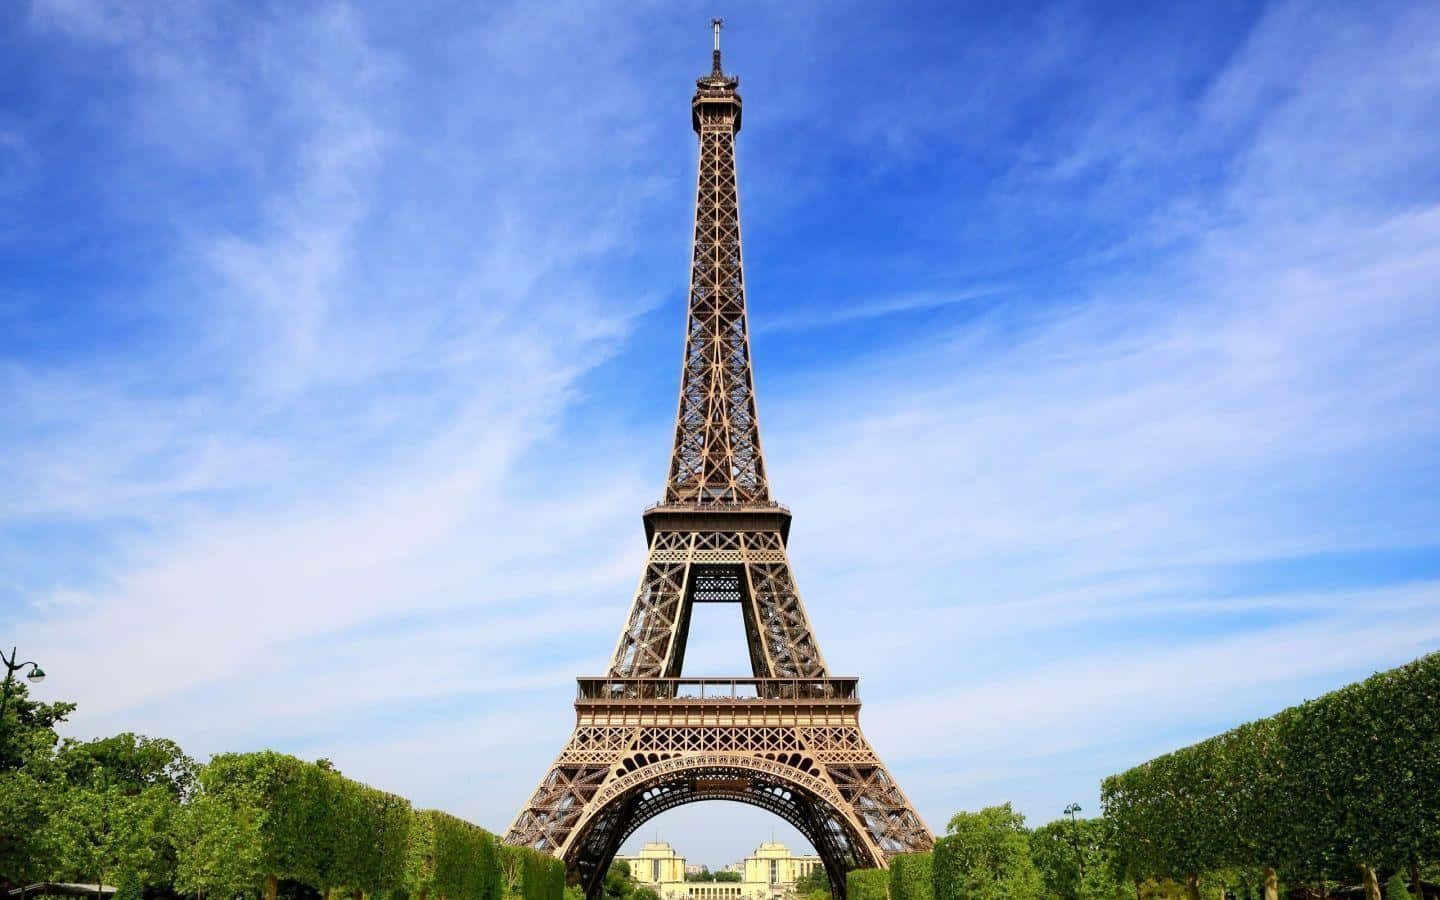 The Eiffel Tower standing tall and proud in the city of Paris